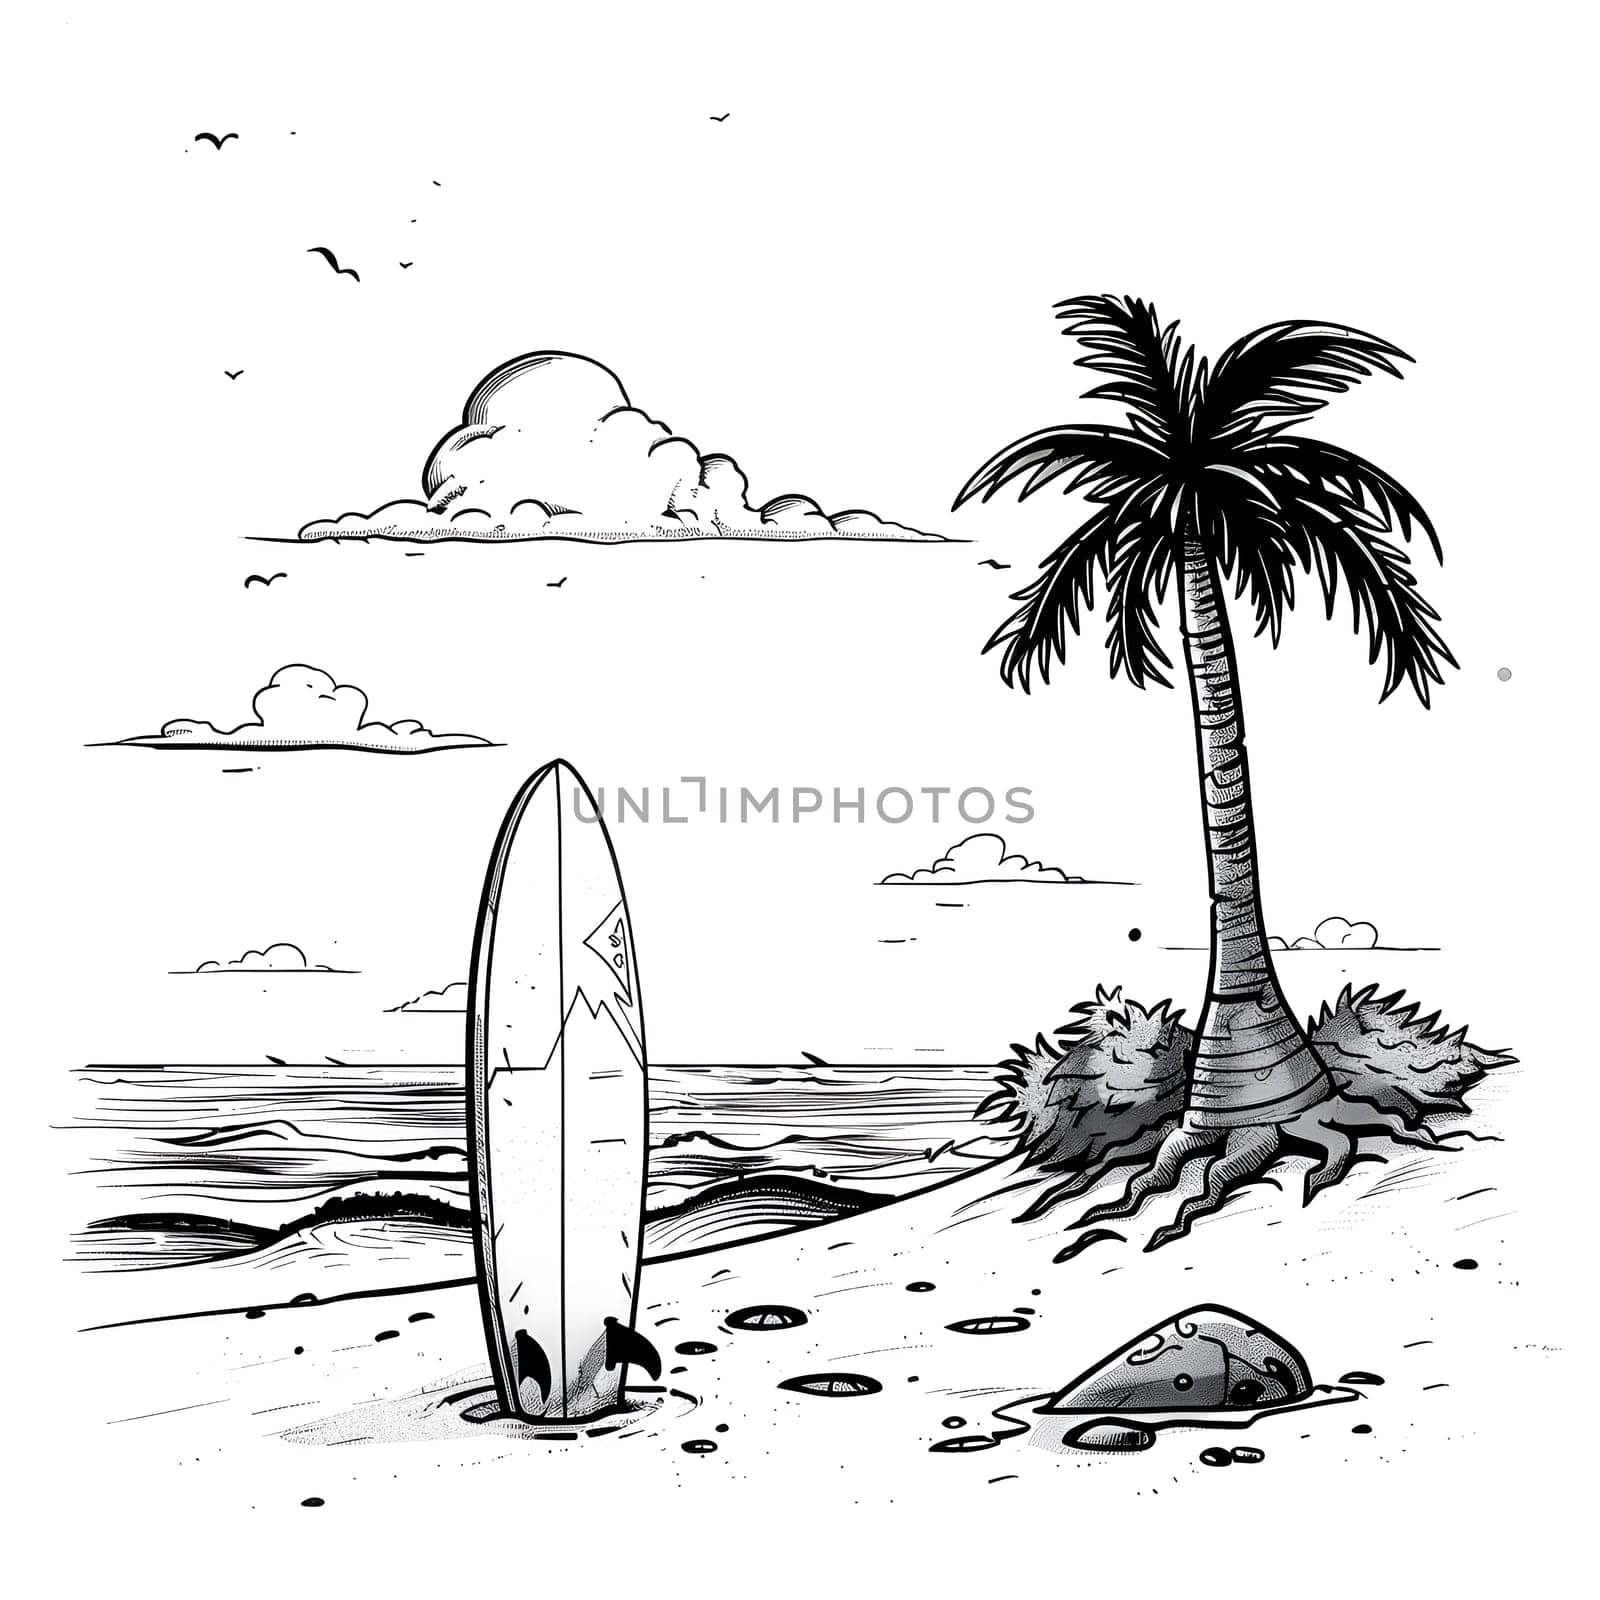 A monochromatic drawing of a palm tree and surfboard on a beach, capturing the essence of a peaceful coastal landscape in a minimalist art style